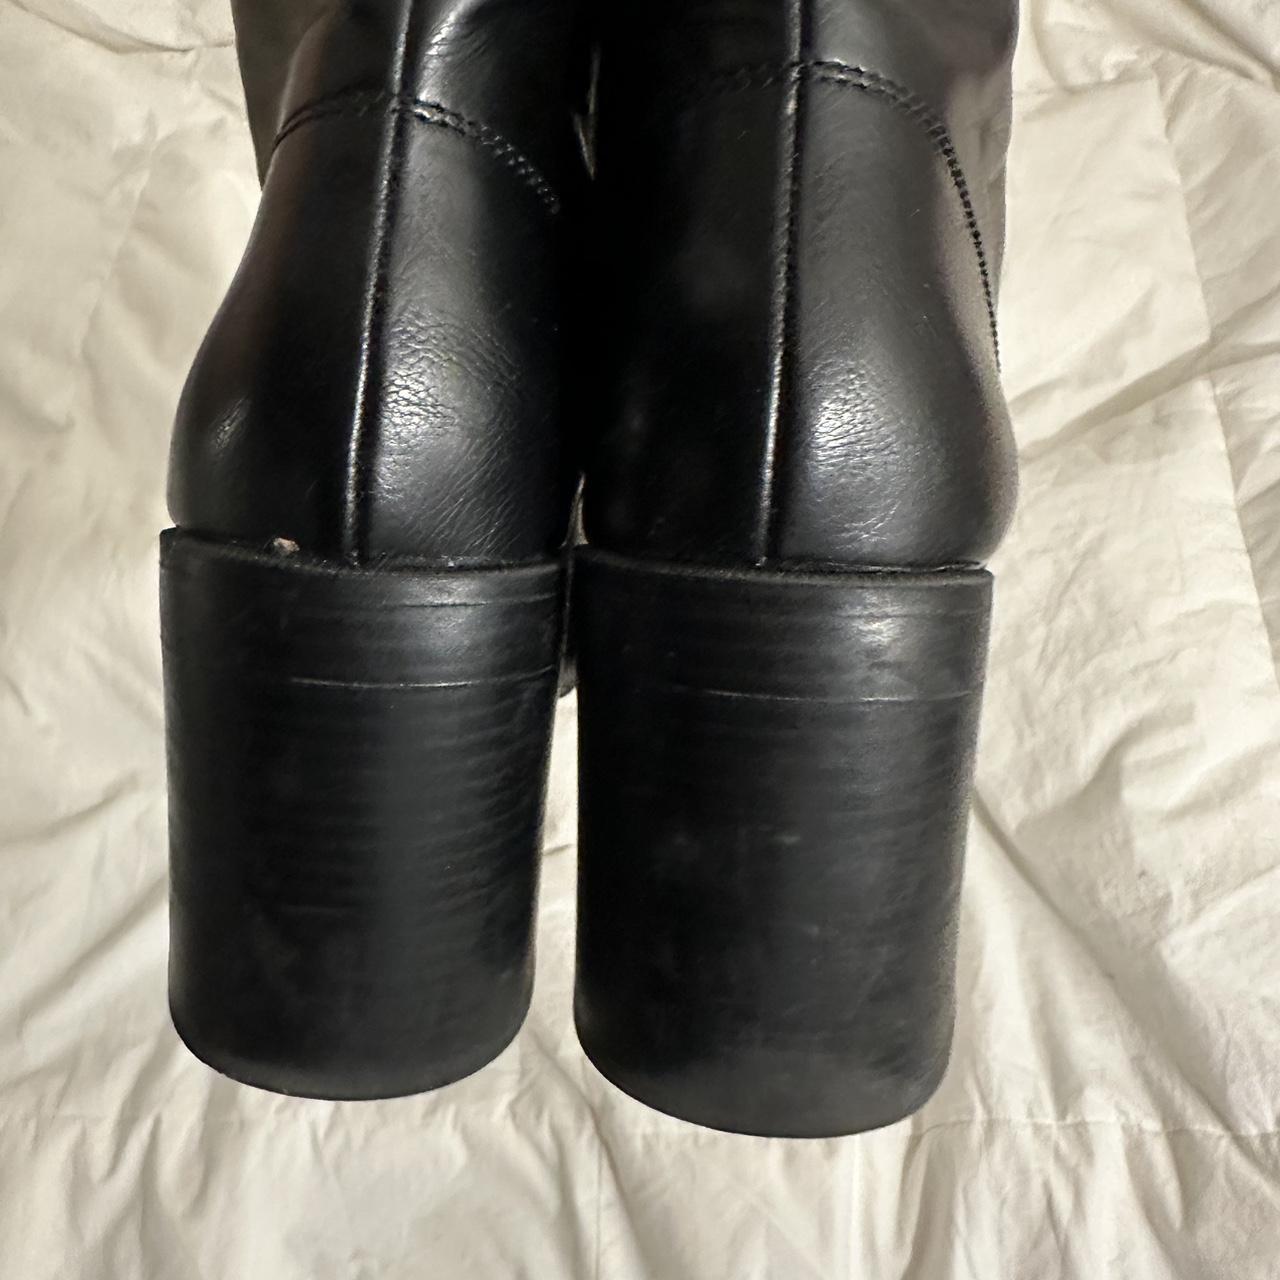 Dirty Laundry Women's Black Boots (3)